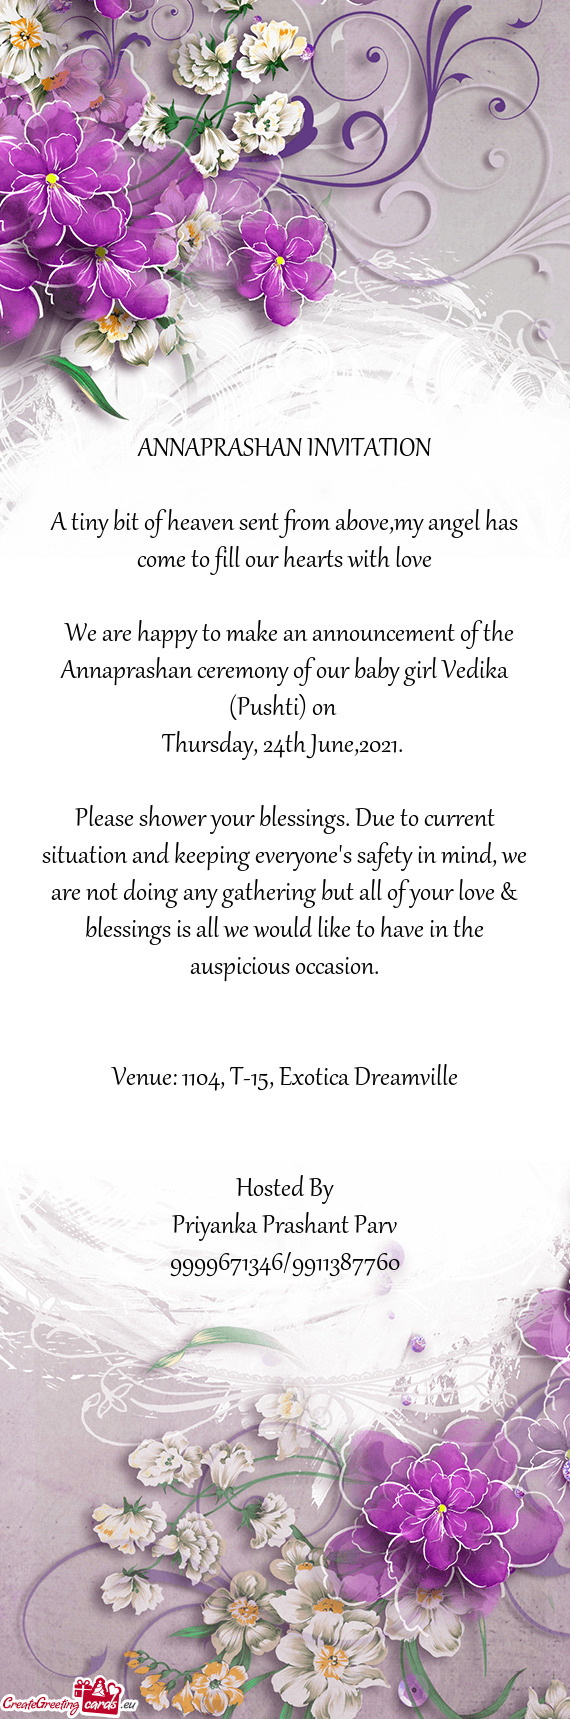 We are happy to make an announcement of the Annaprashan ceremony of our baby girl Vedika (Pushti)